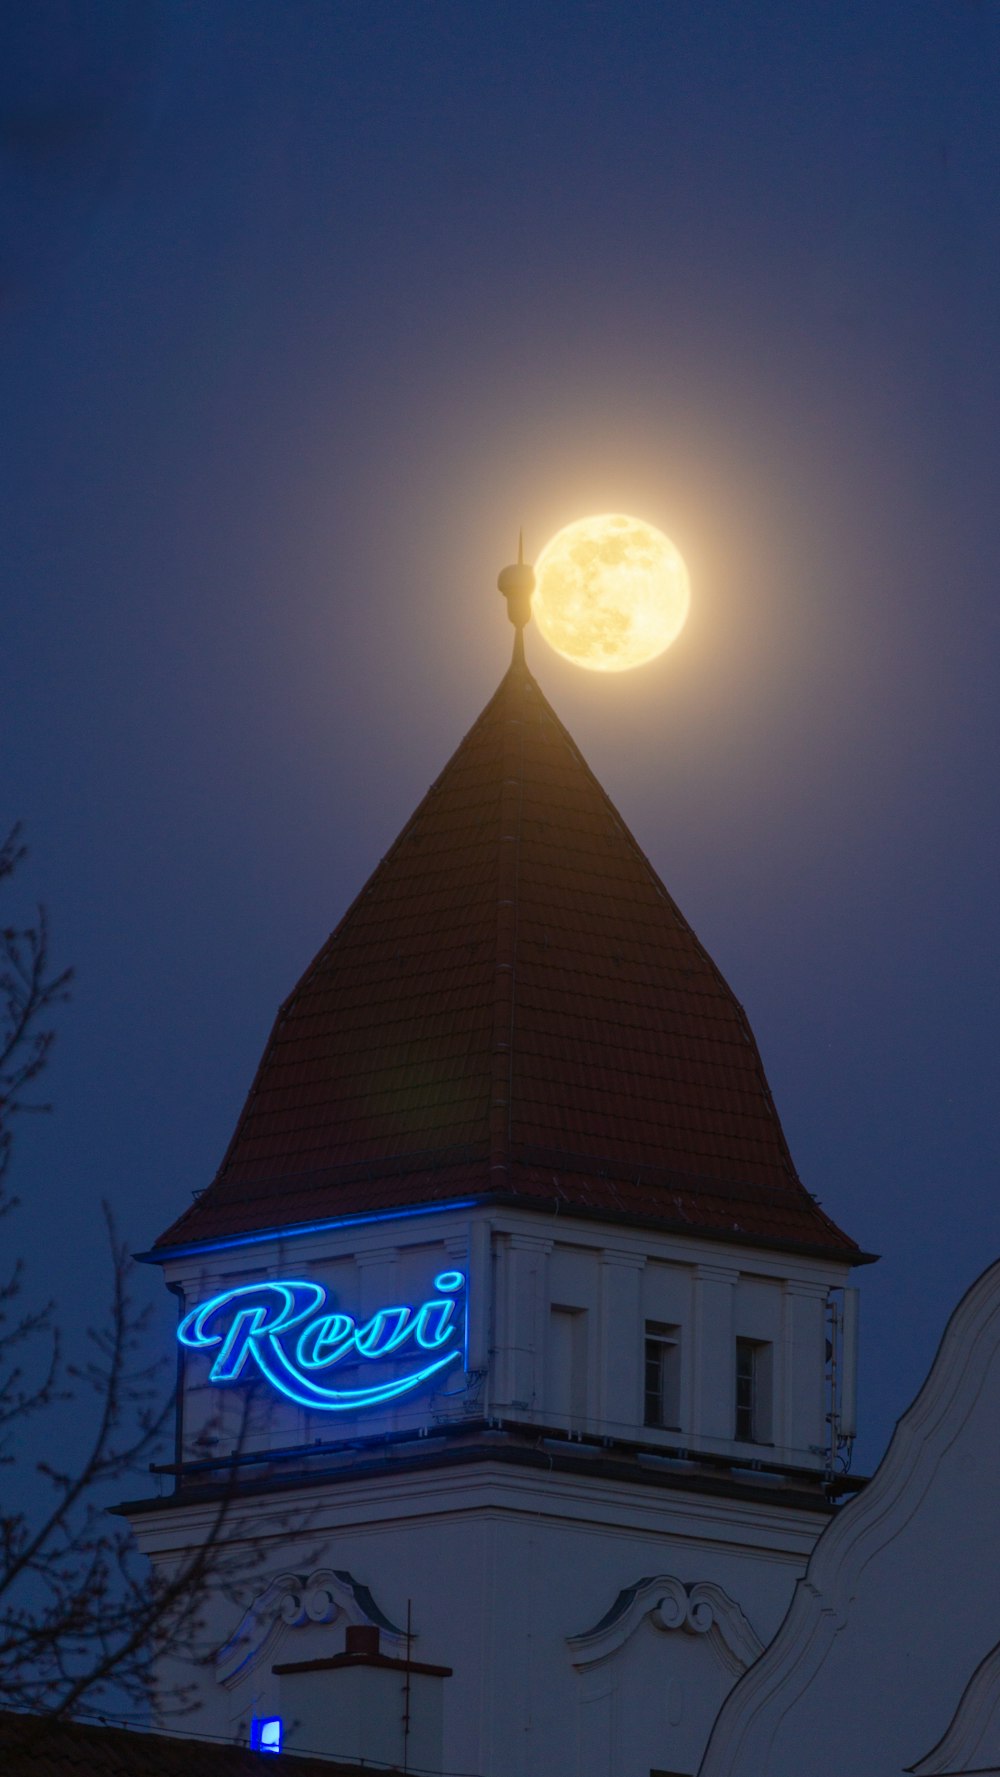 a full moon rises over a building with a clock tower